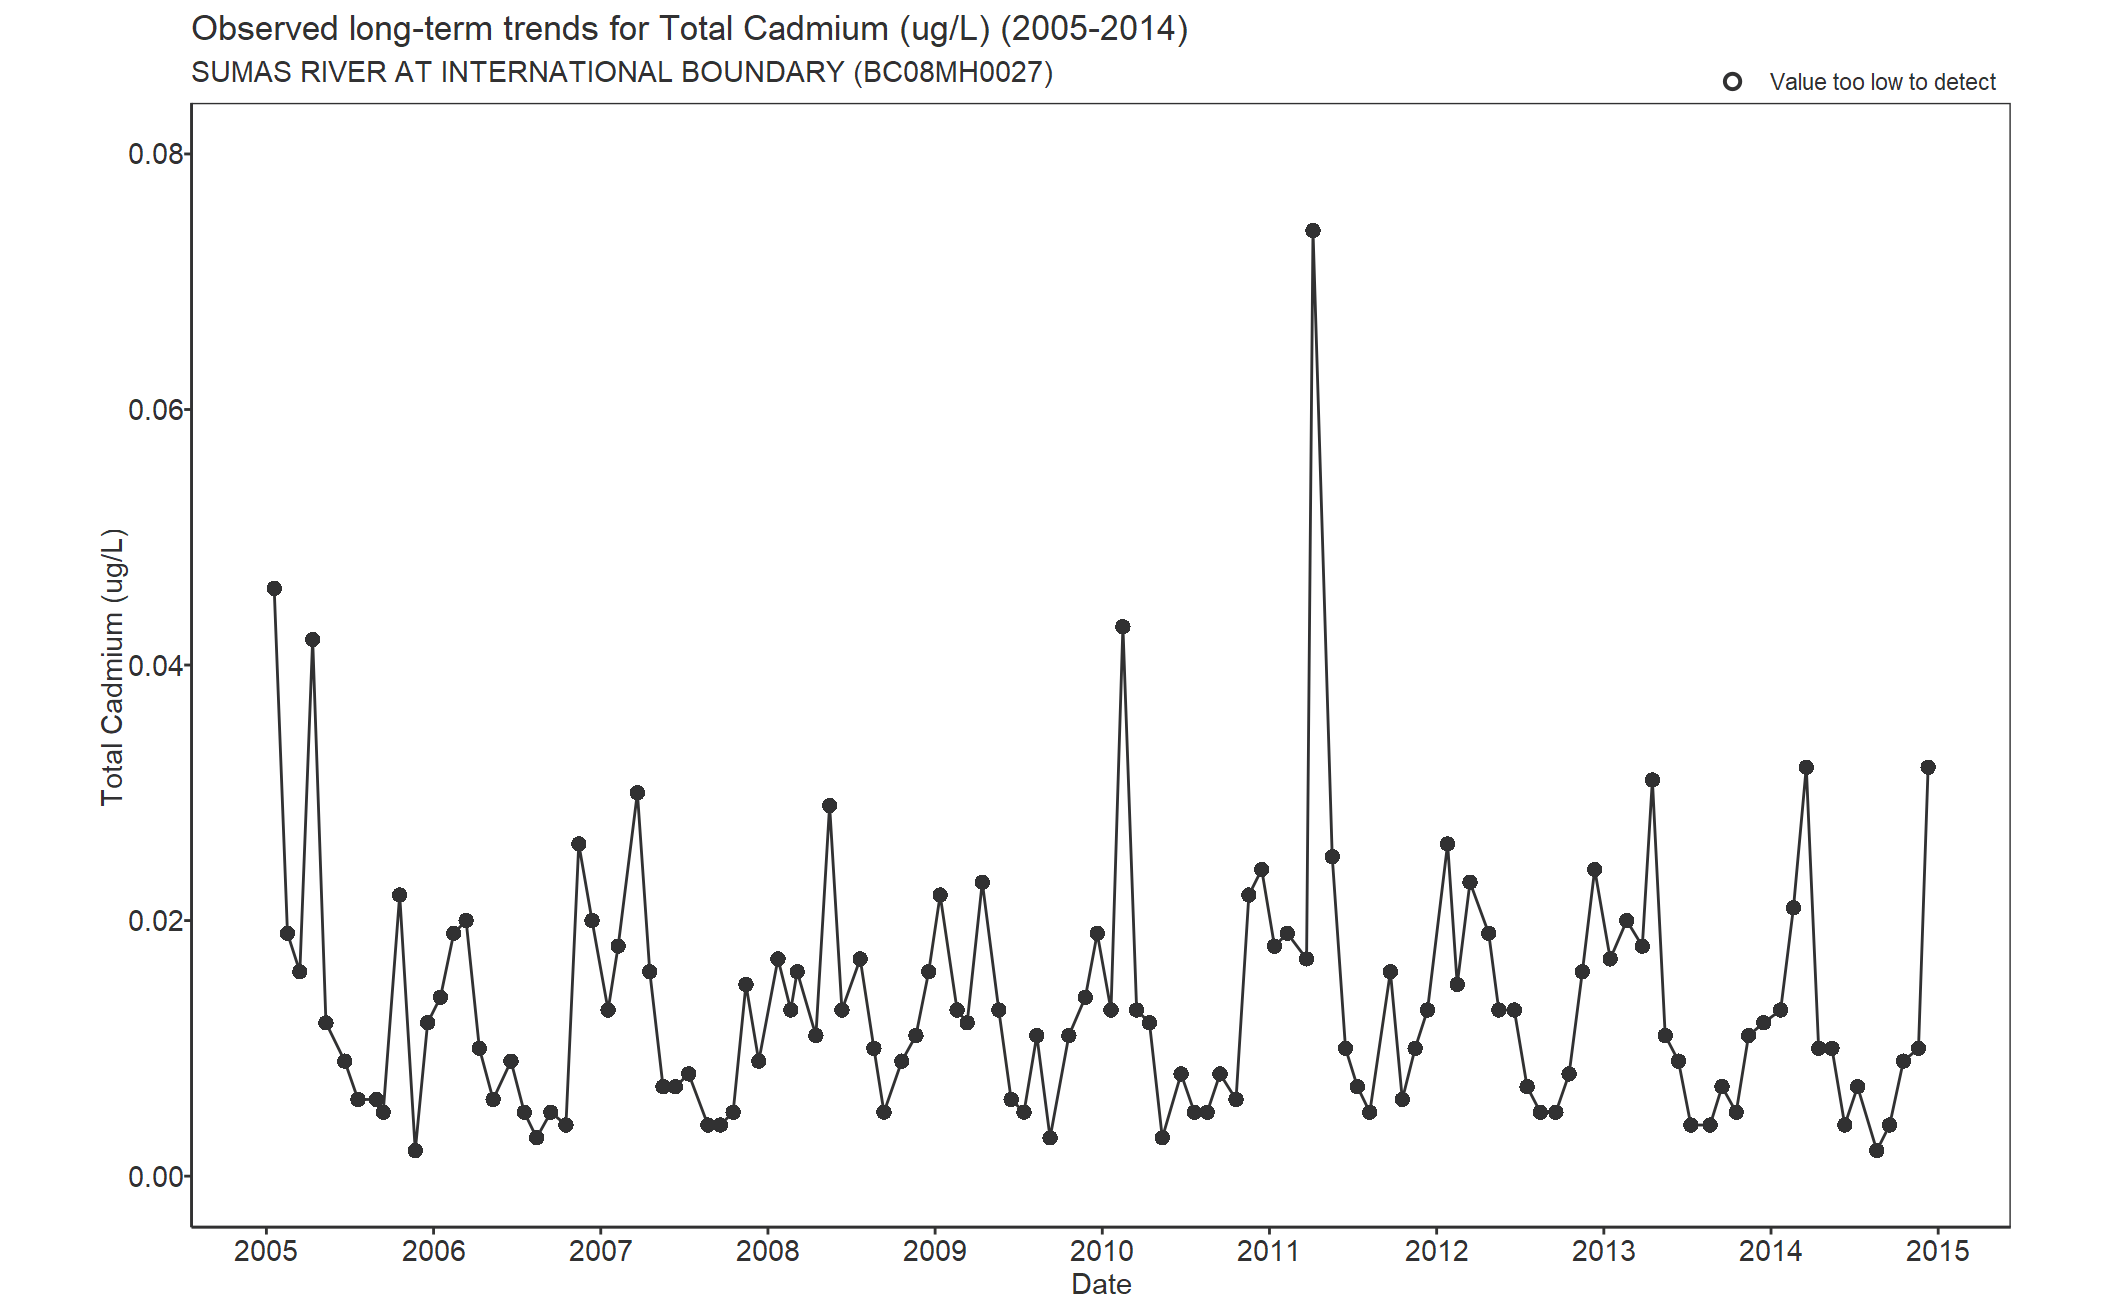 Observed long-term trends for Cadmium Total (2005-2014)